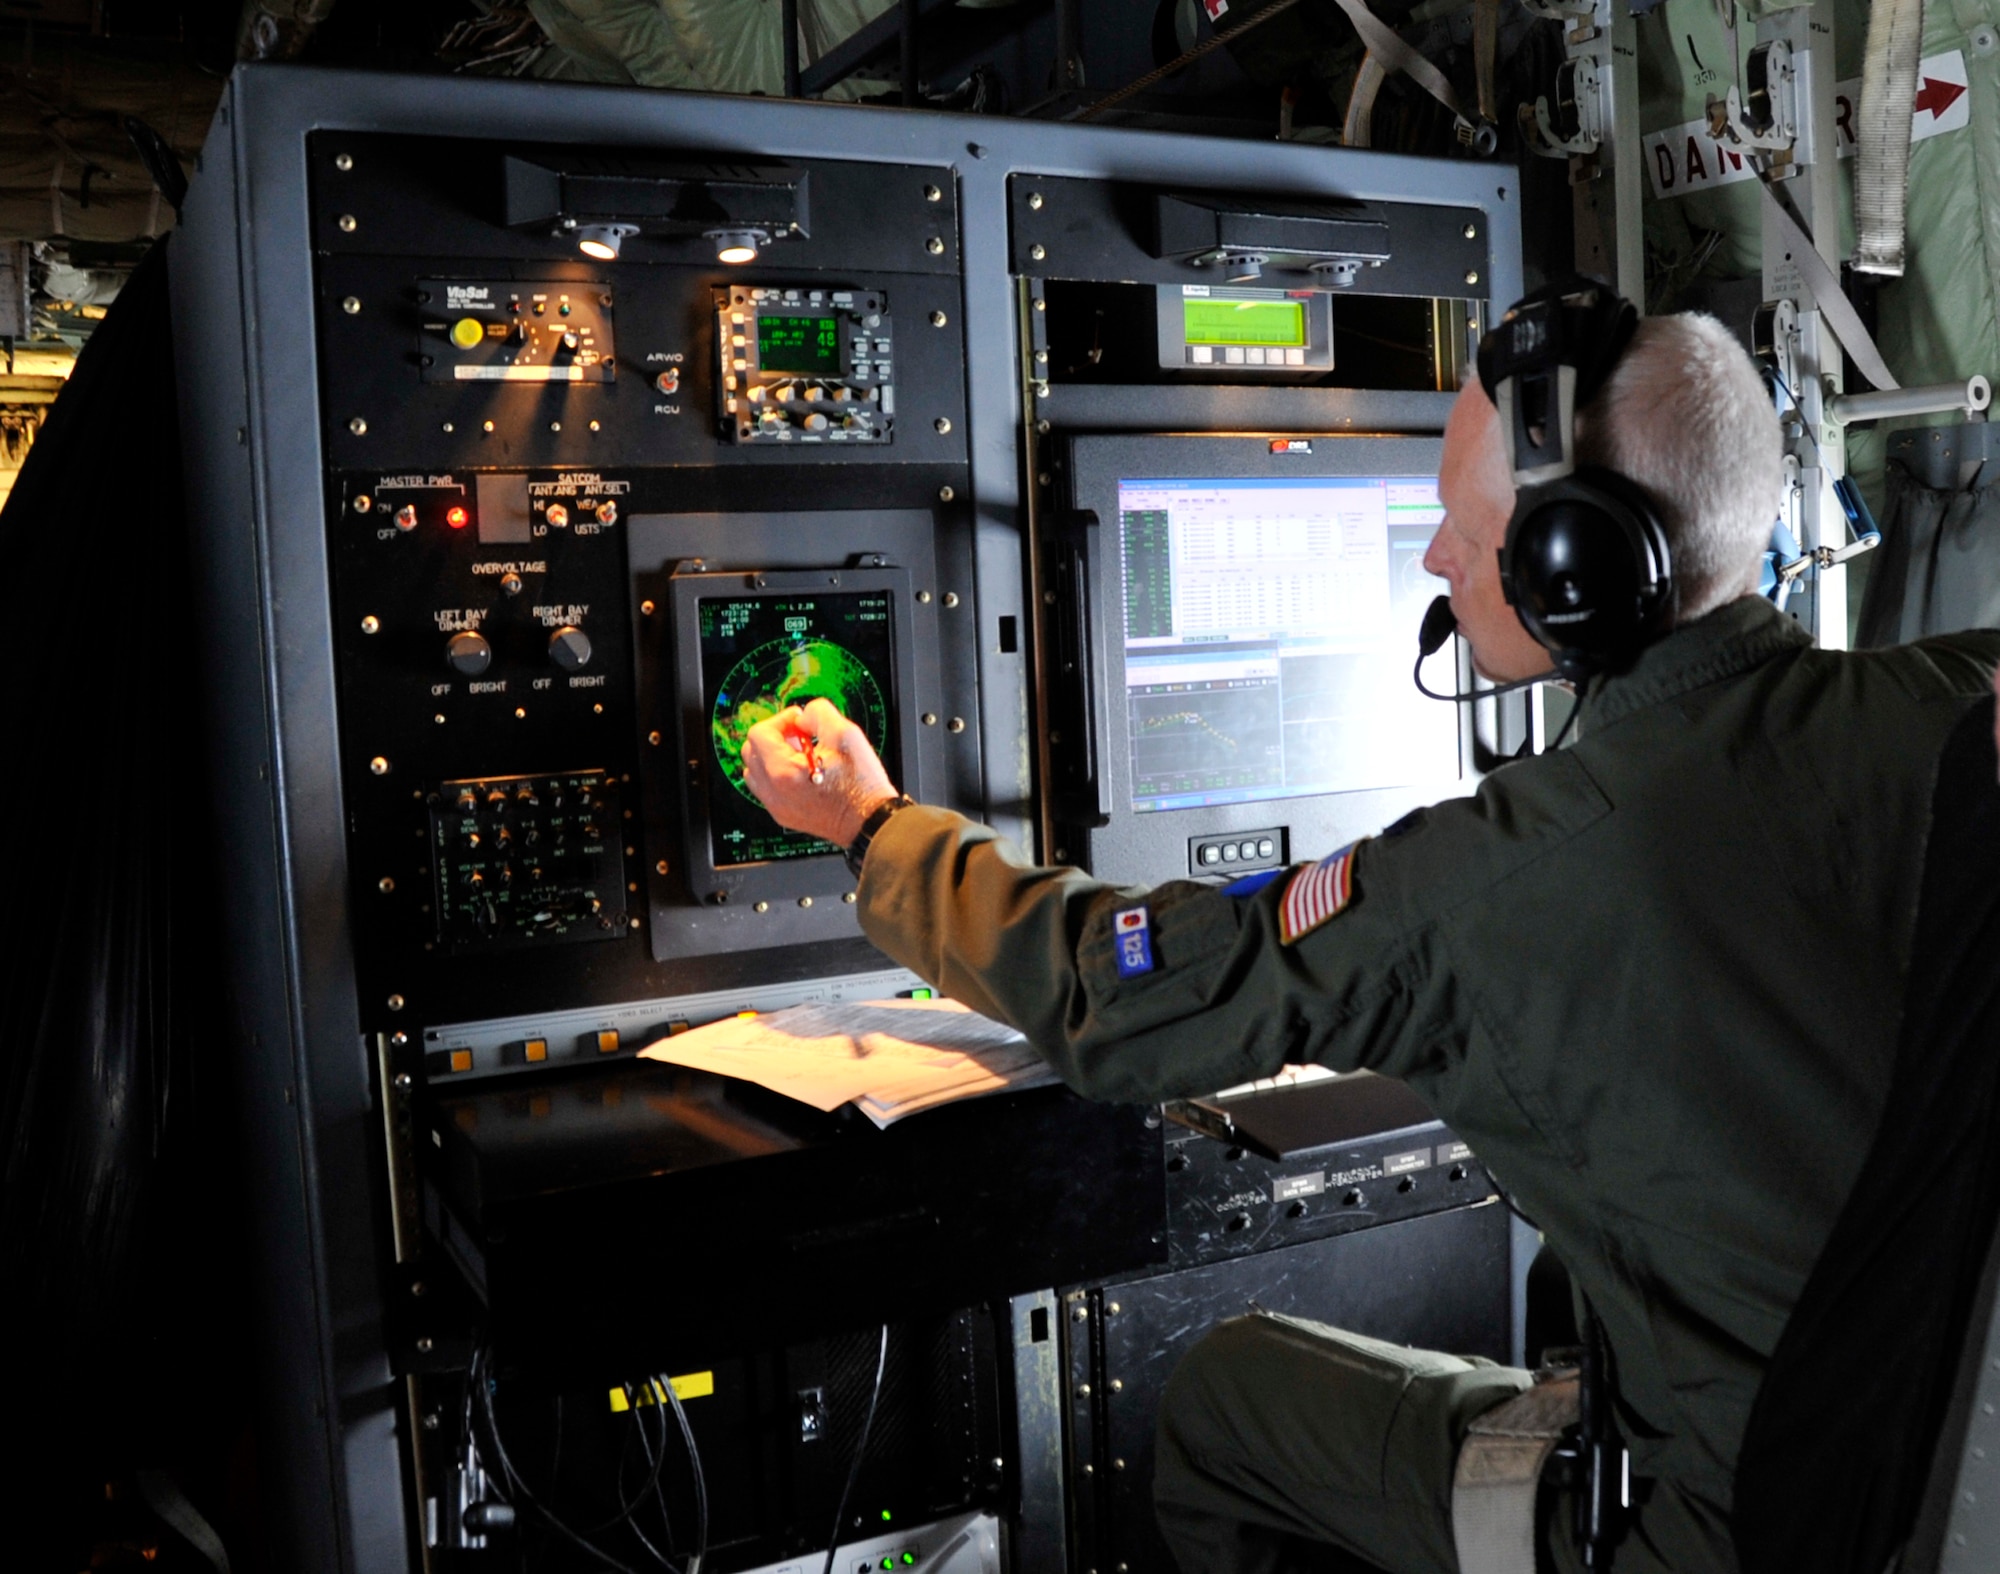 Lt. Col. Jon Talbot, 53rd Weather Reconnaissance Squadron aerial reconnaissance weather officer, points to the eye of Hurricane Julio during a hurricane flight off the coast of Hawaii Aug. 9, 2014. The 53rd WRS "Hurricane Hunters" aircrew and 403rd Wing maintenance personnel deployed to Joint Base Pearl Harbor-Hickam, Hawaii, to fly storm missions into Hurricanes Iselle and Julio.  The "Hurricane Hunters" fly storm missions in both the Atlantic and Pacific Oceans during the hurricane season June 1 to Nov. 30 yearly. (U.S. Air Force photo by Master Sgt. Jessica Kendziorek)  